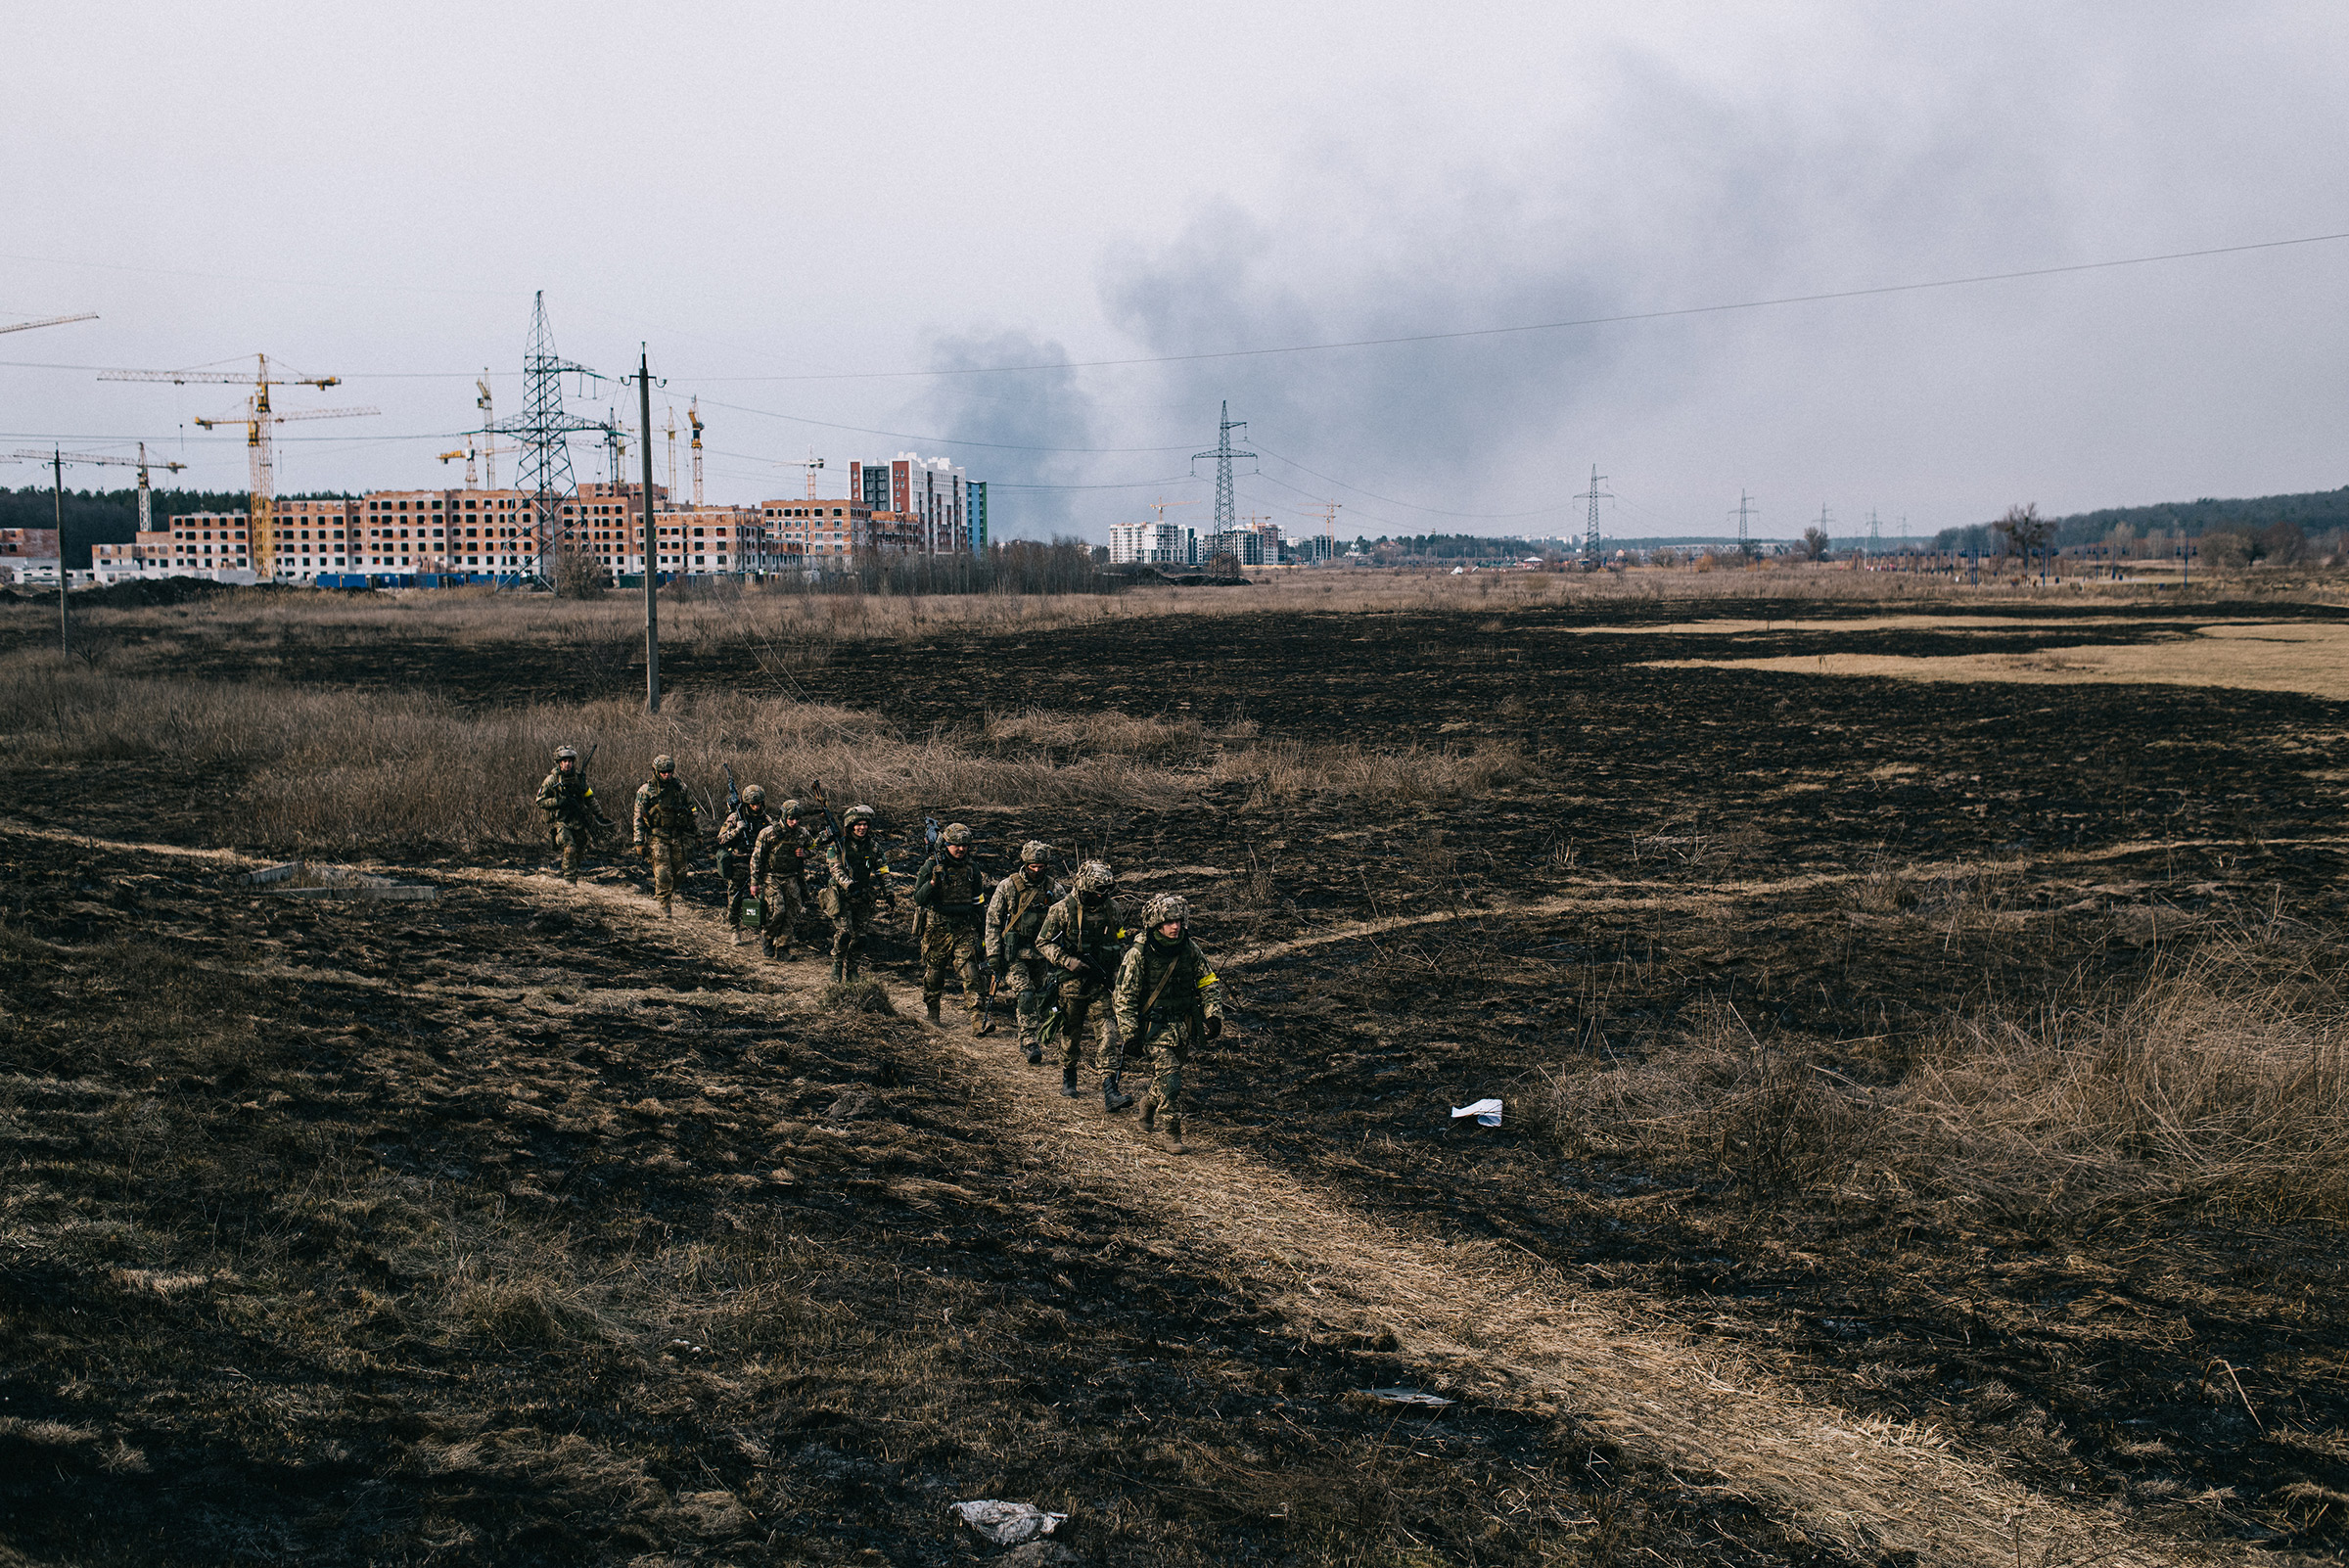 Ukrainian soldiers returning to Kyiv after battle in Irpin on March 12 (Maxim Dondyuk)